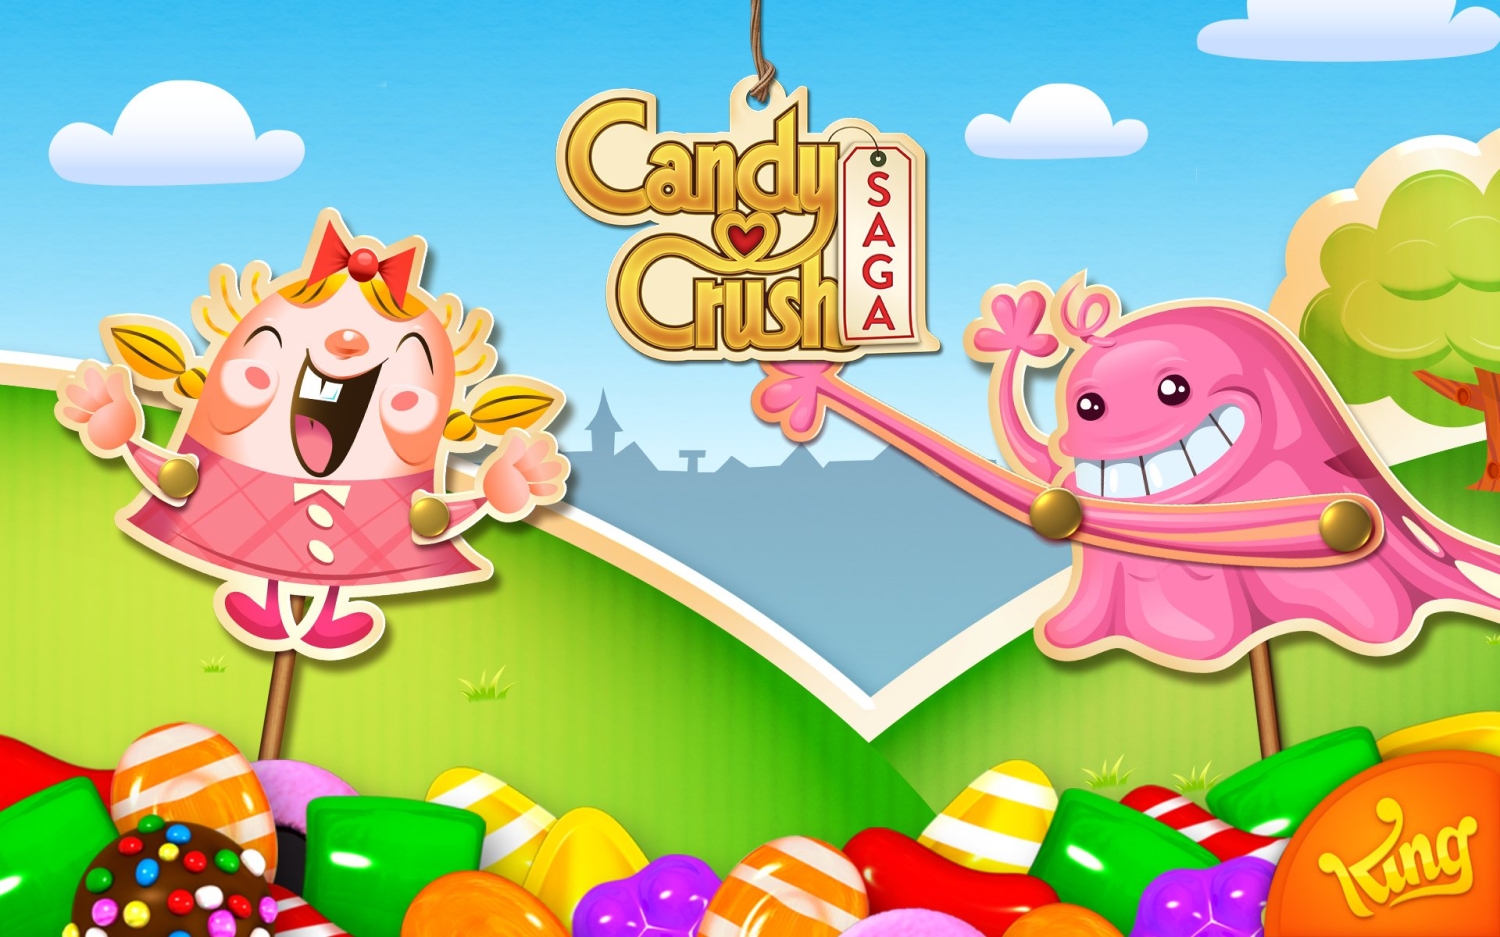 Candy Crush buyout masks mobile gaming problems